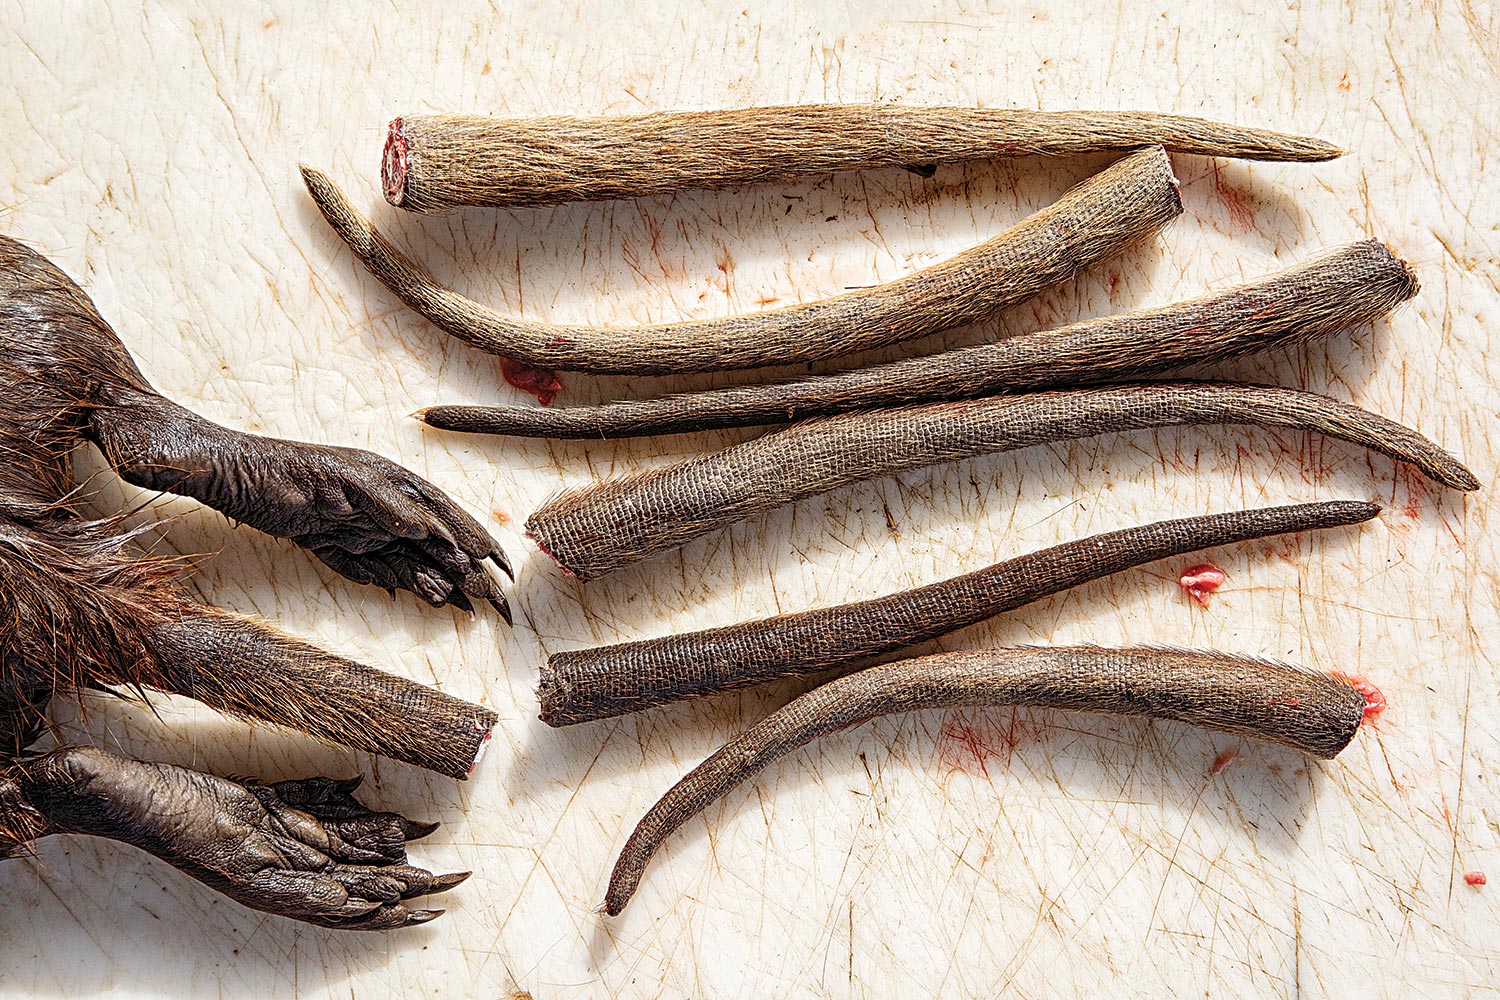 Nutria tails and feet on a cutting board